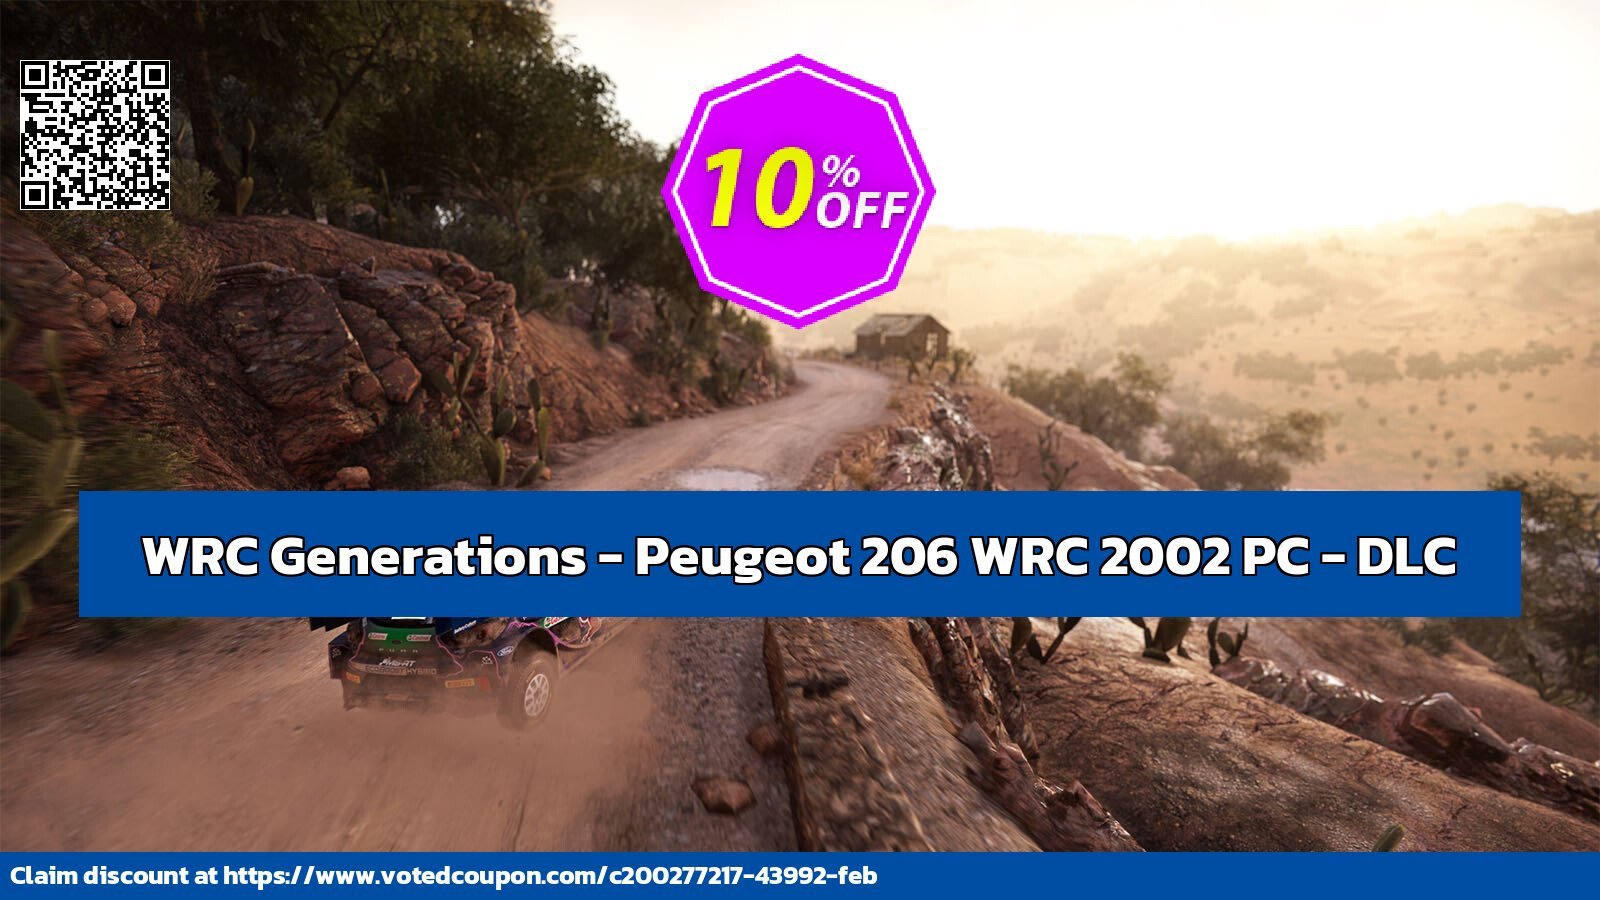 WRC Generations - Peugeot 206 WRC 2002 PC - DLC Coupon Code May 2024, 18% OFF - VotedCoupon